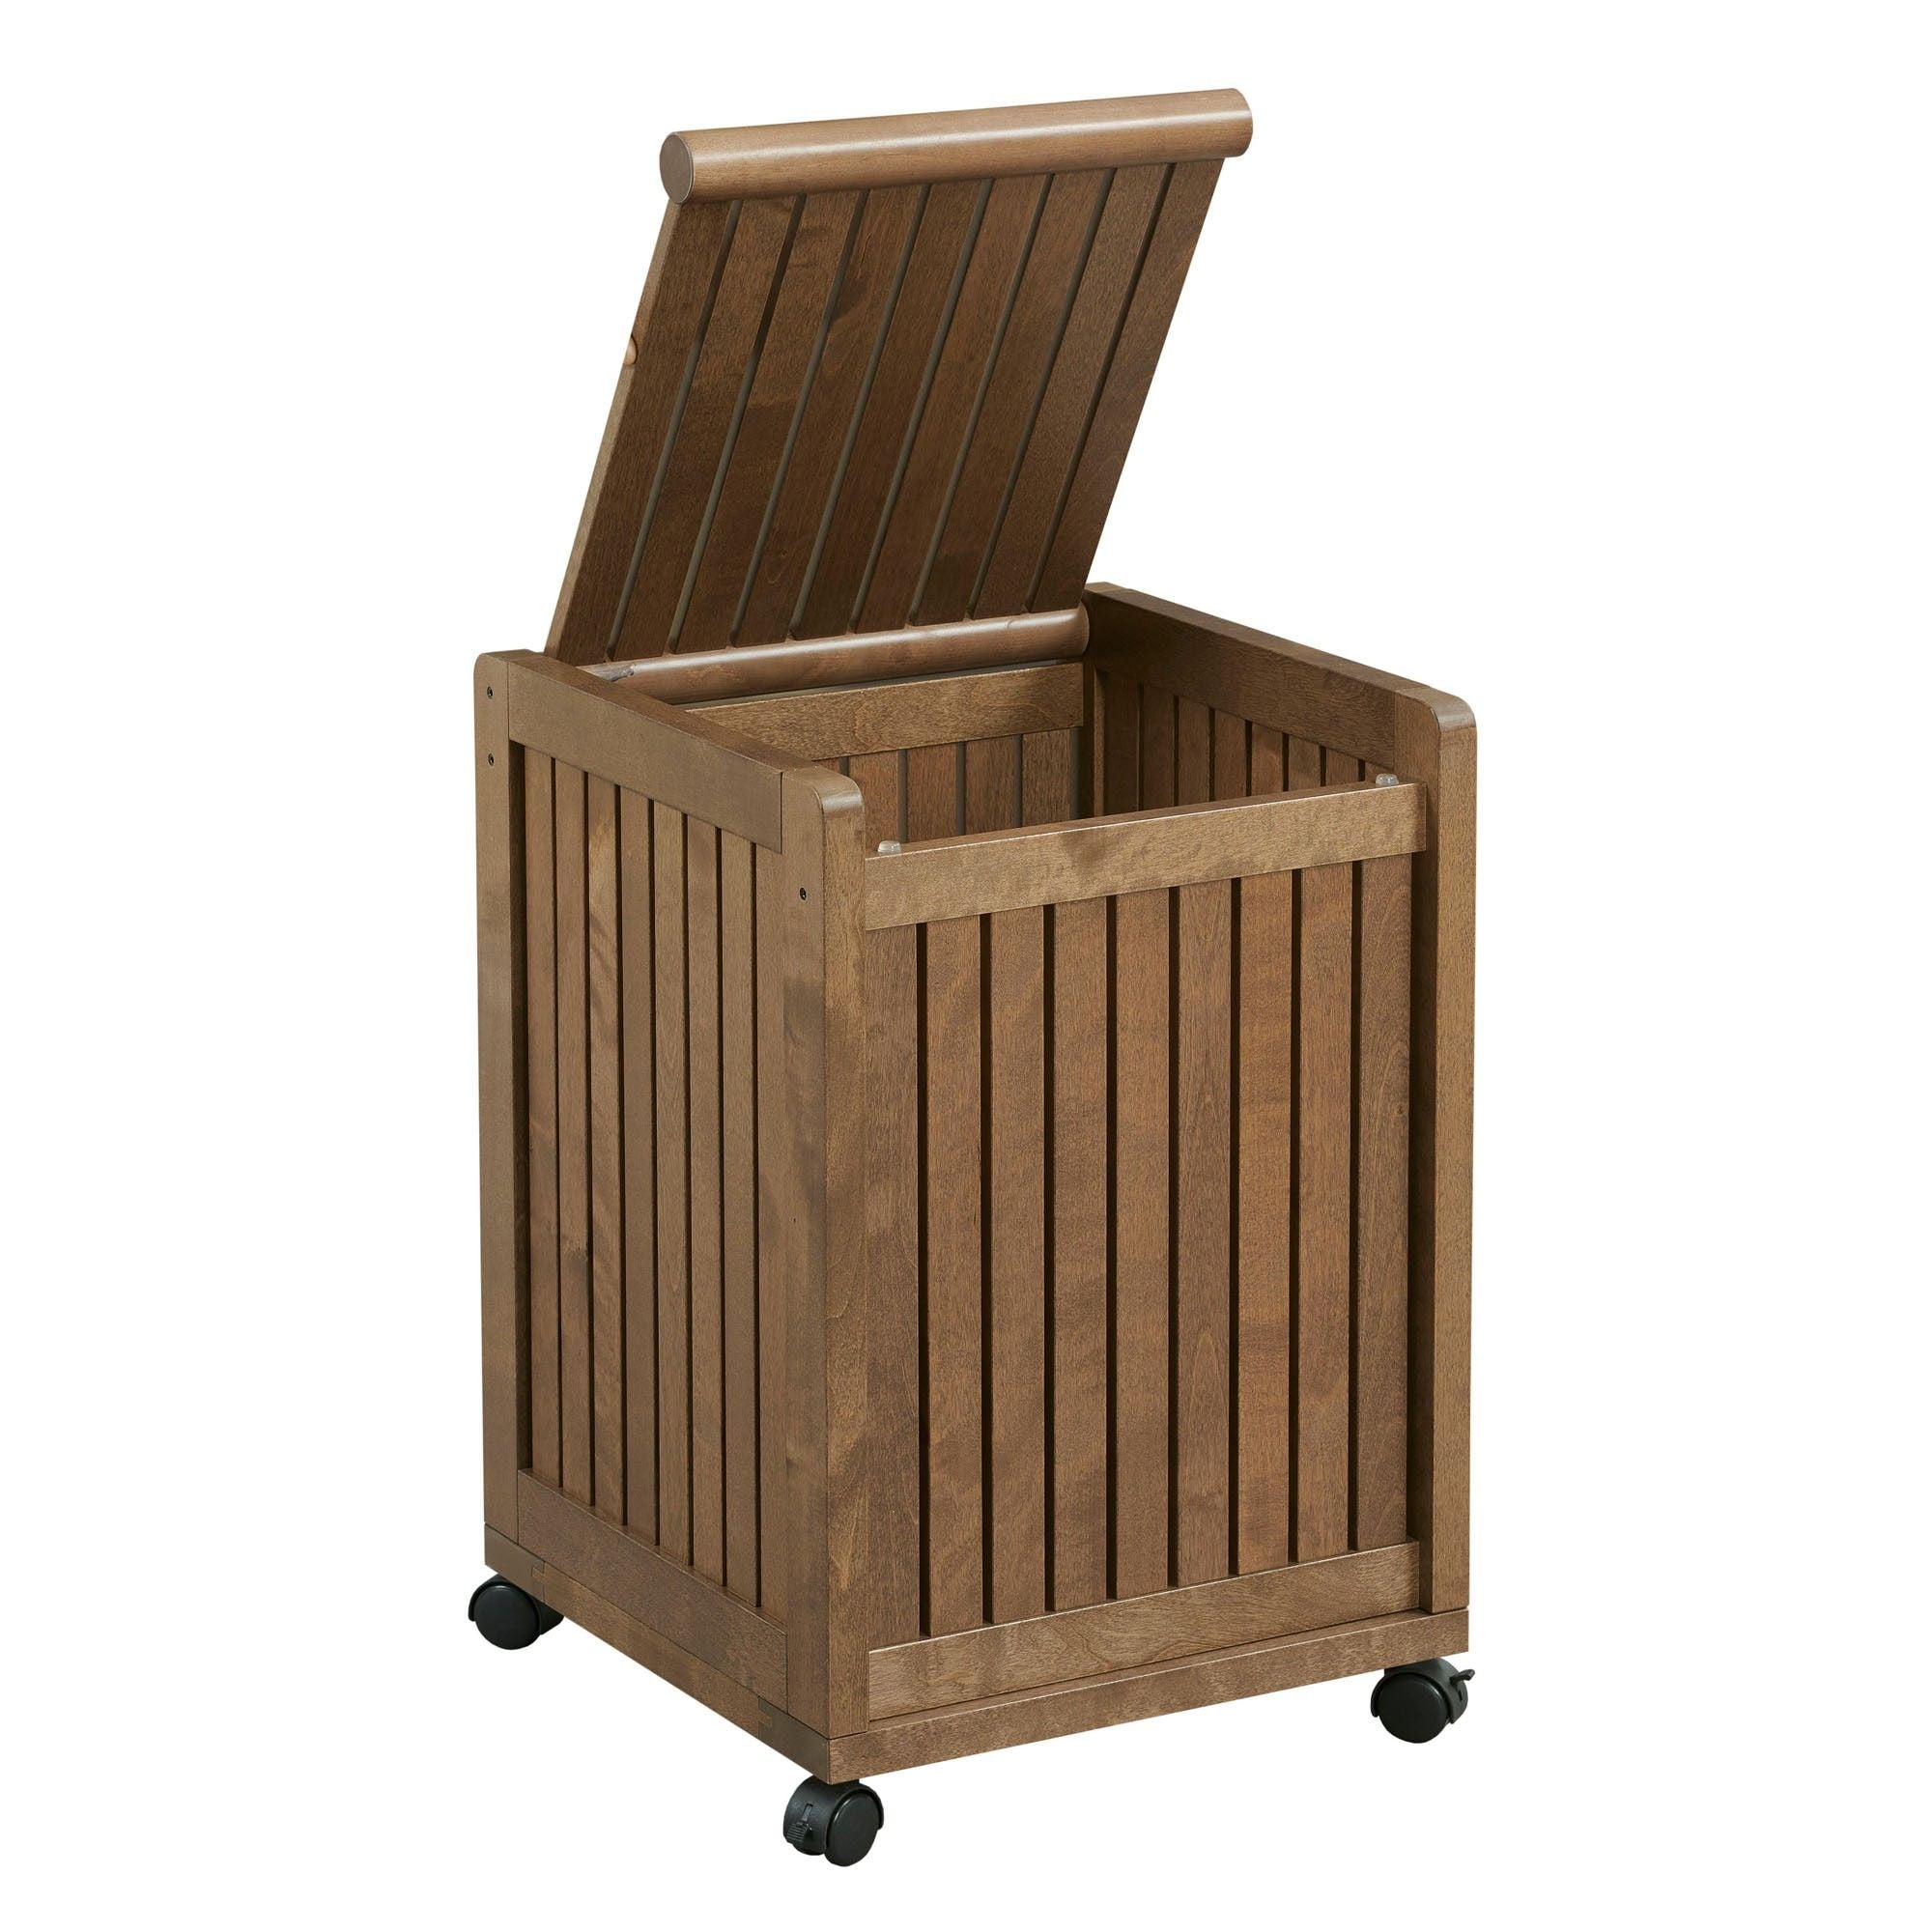 Rolling Laundry Hamper With Lid - Chestnut